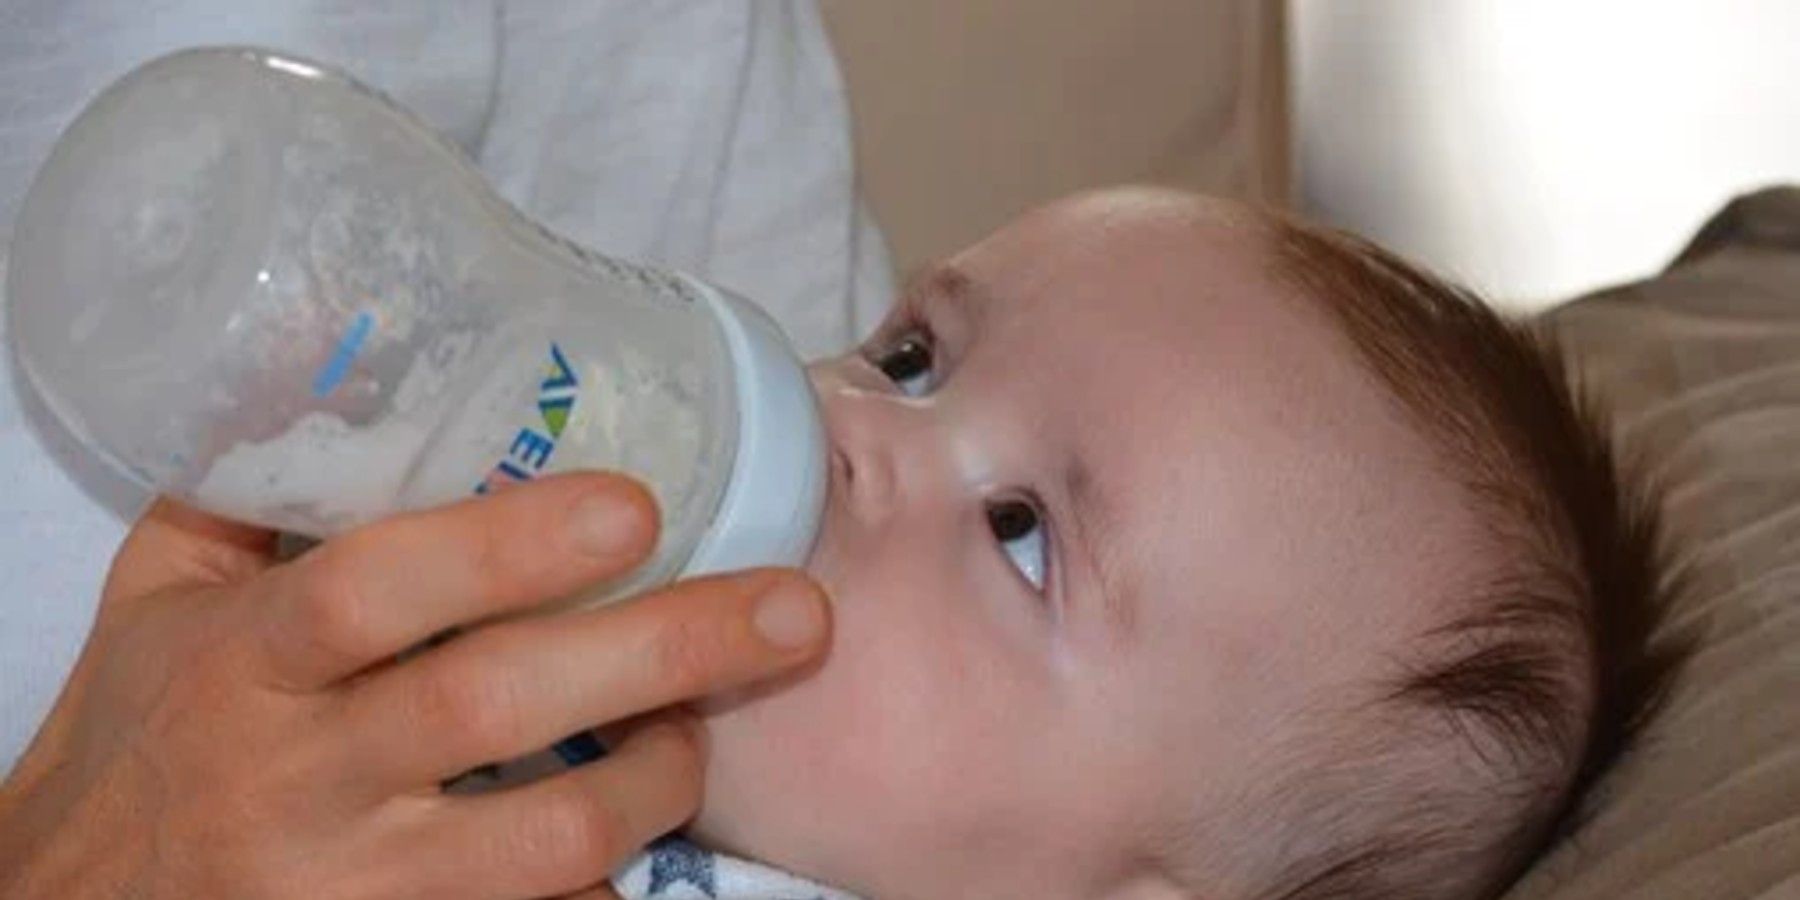 Baby being bottle-fed, and they are not the world's longest breastfed baby.